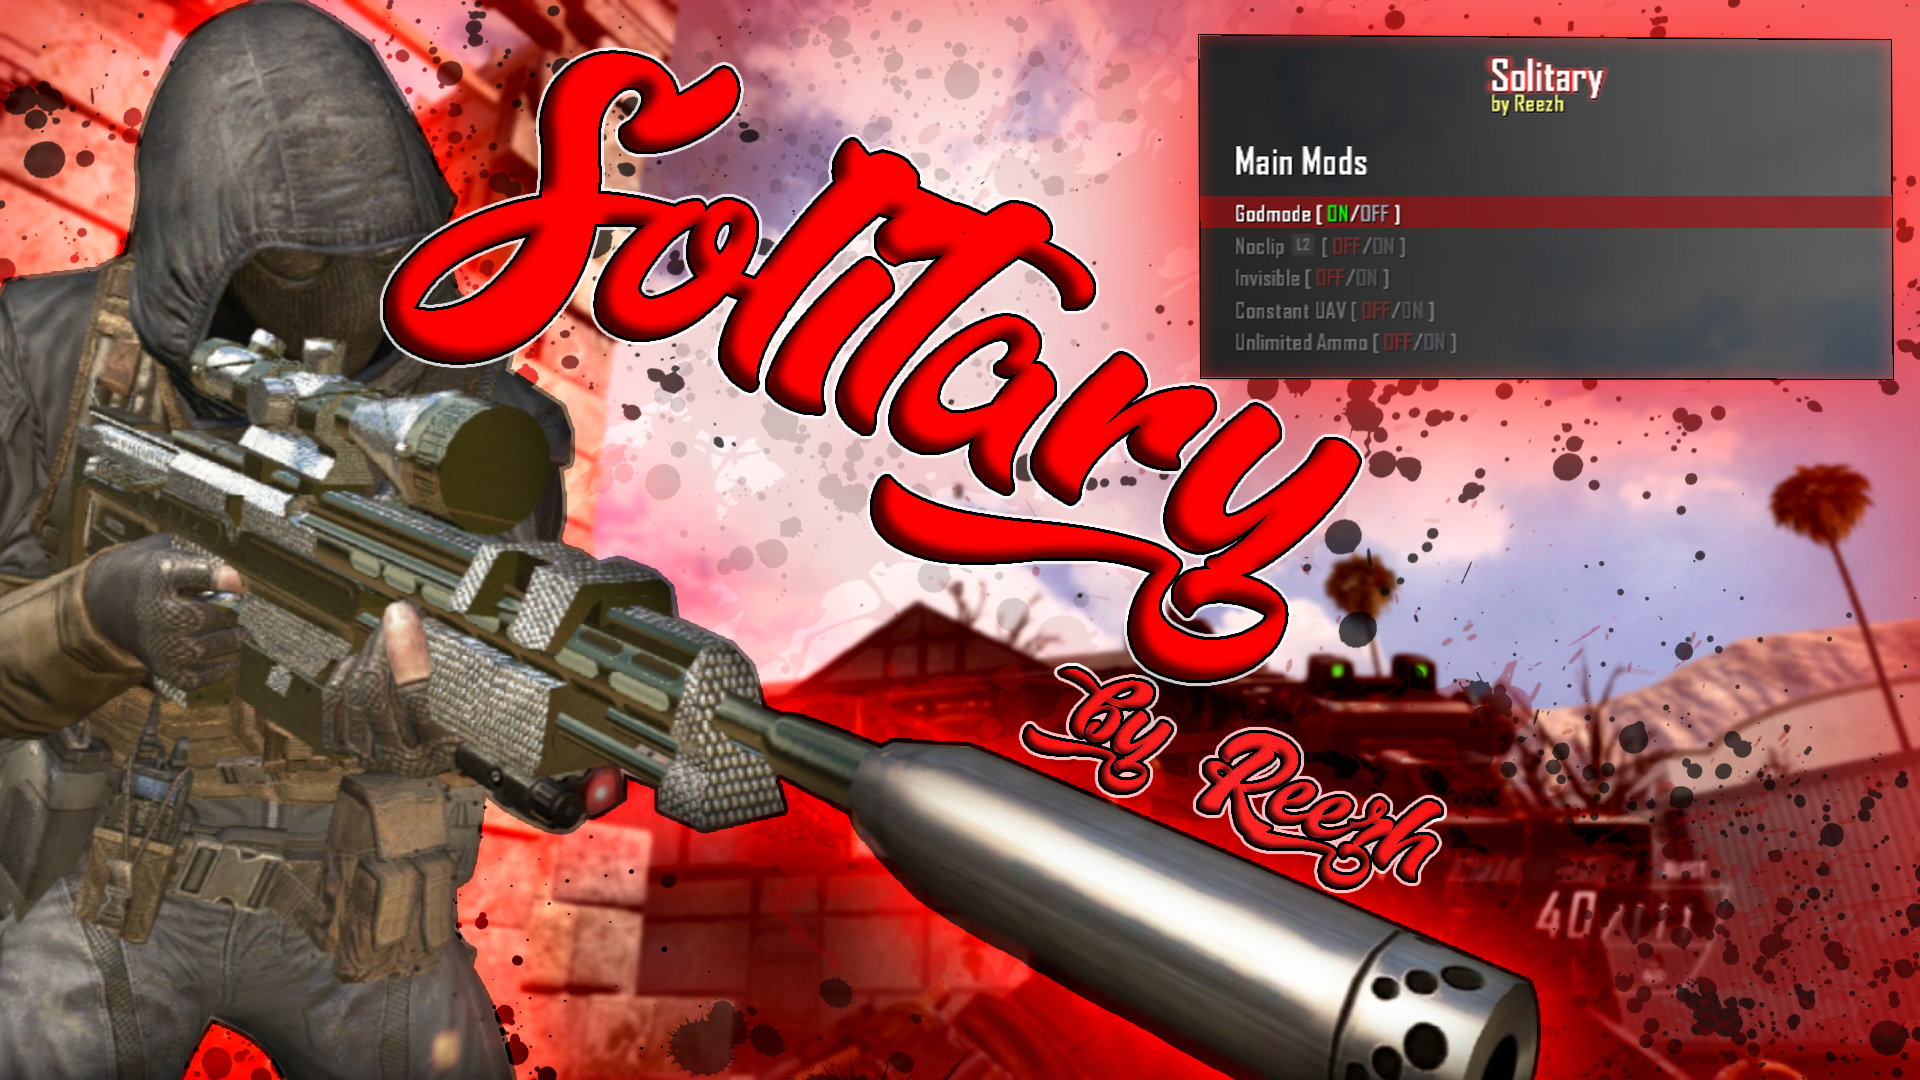 Cmn_Root.English Black Ops 2 Download - Colaboratory